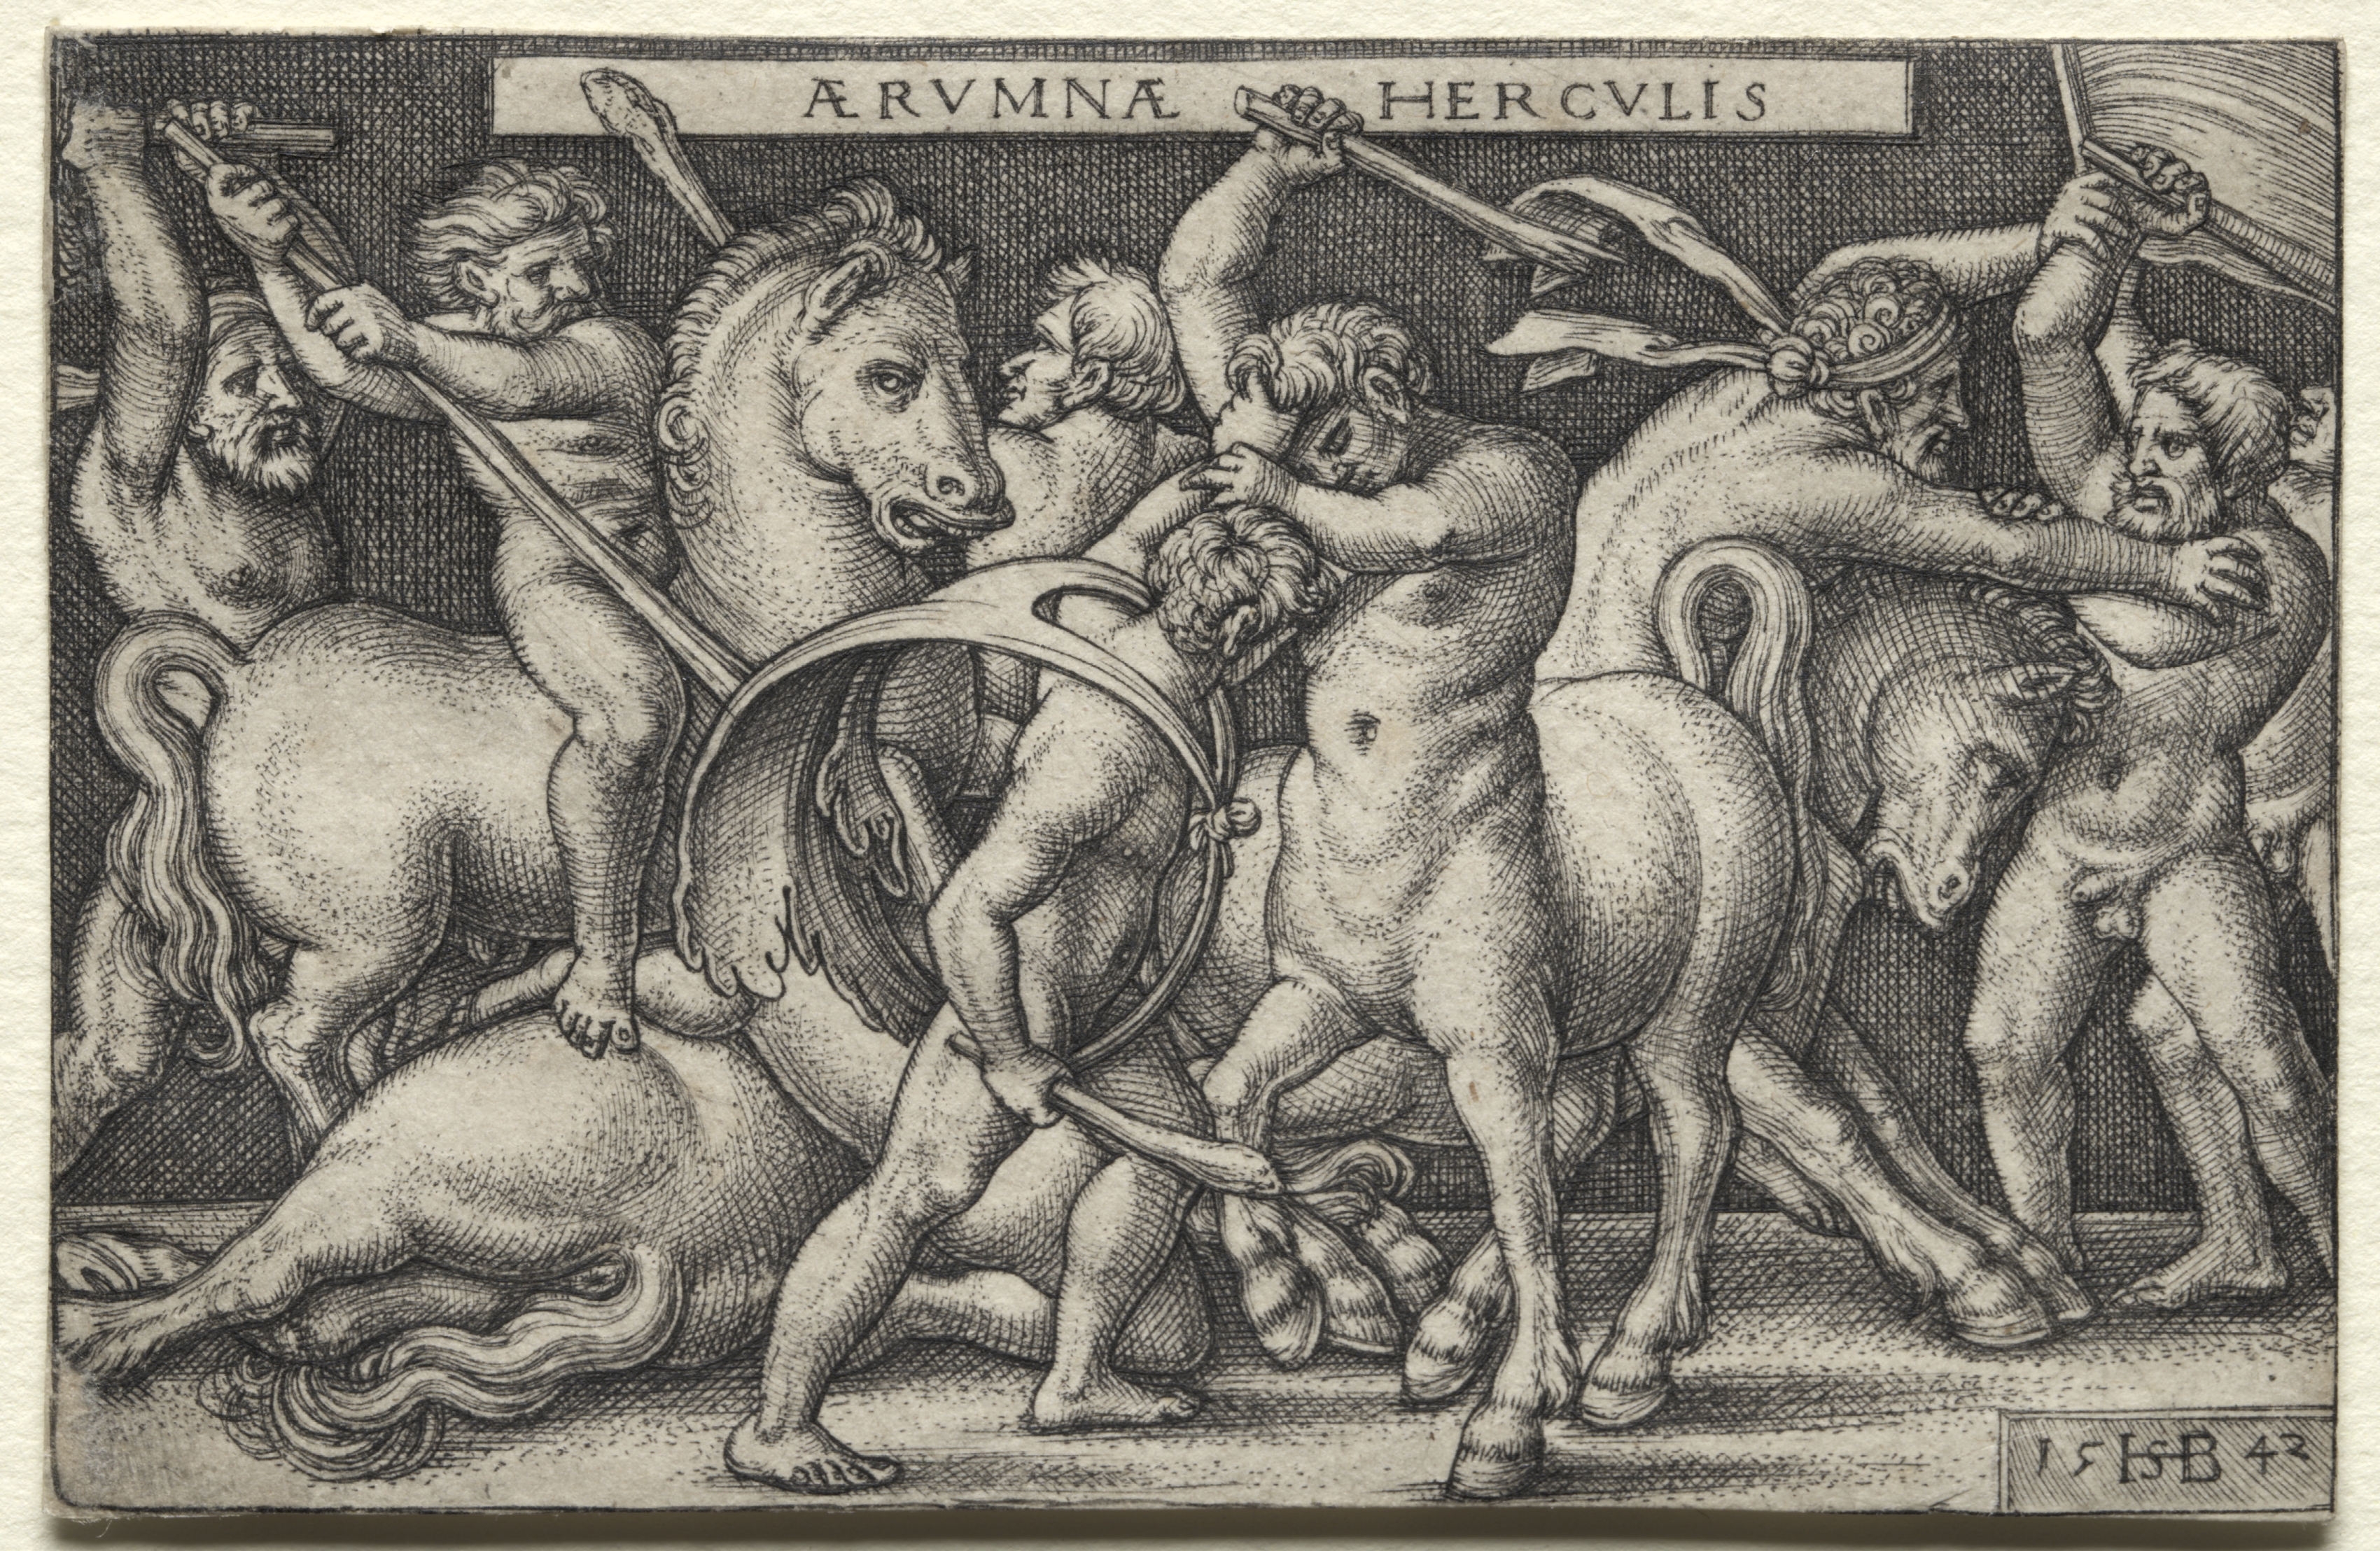 The Labors of Hercules: Hercules Defeating the Centaurs